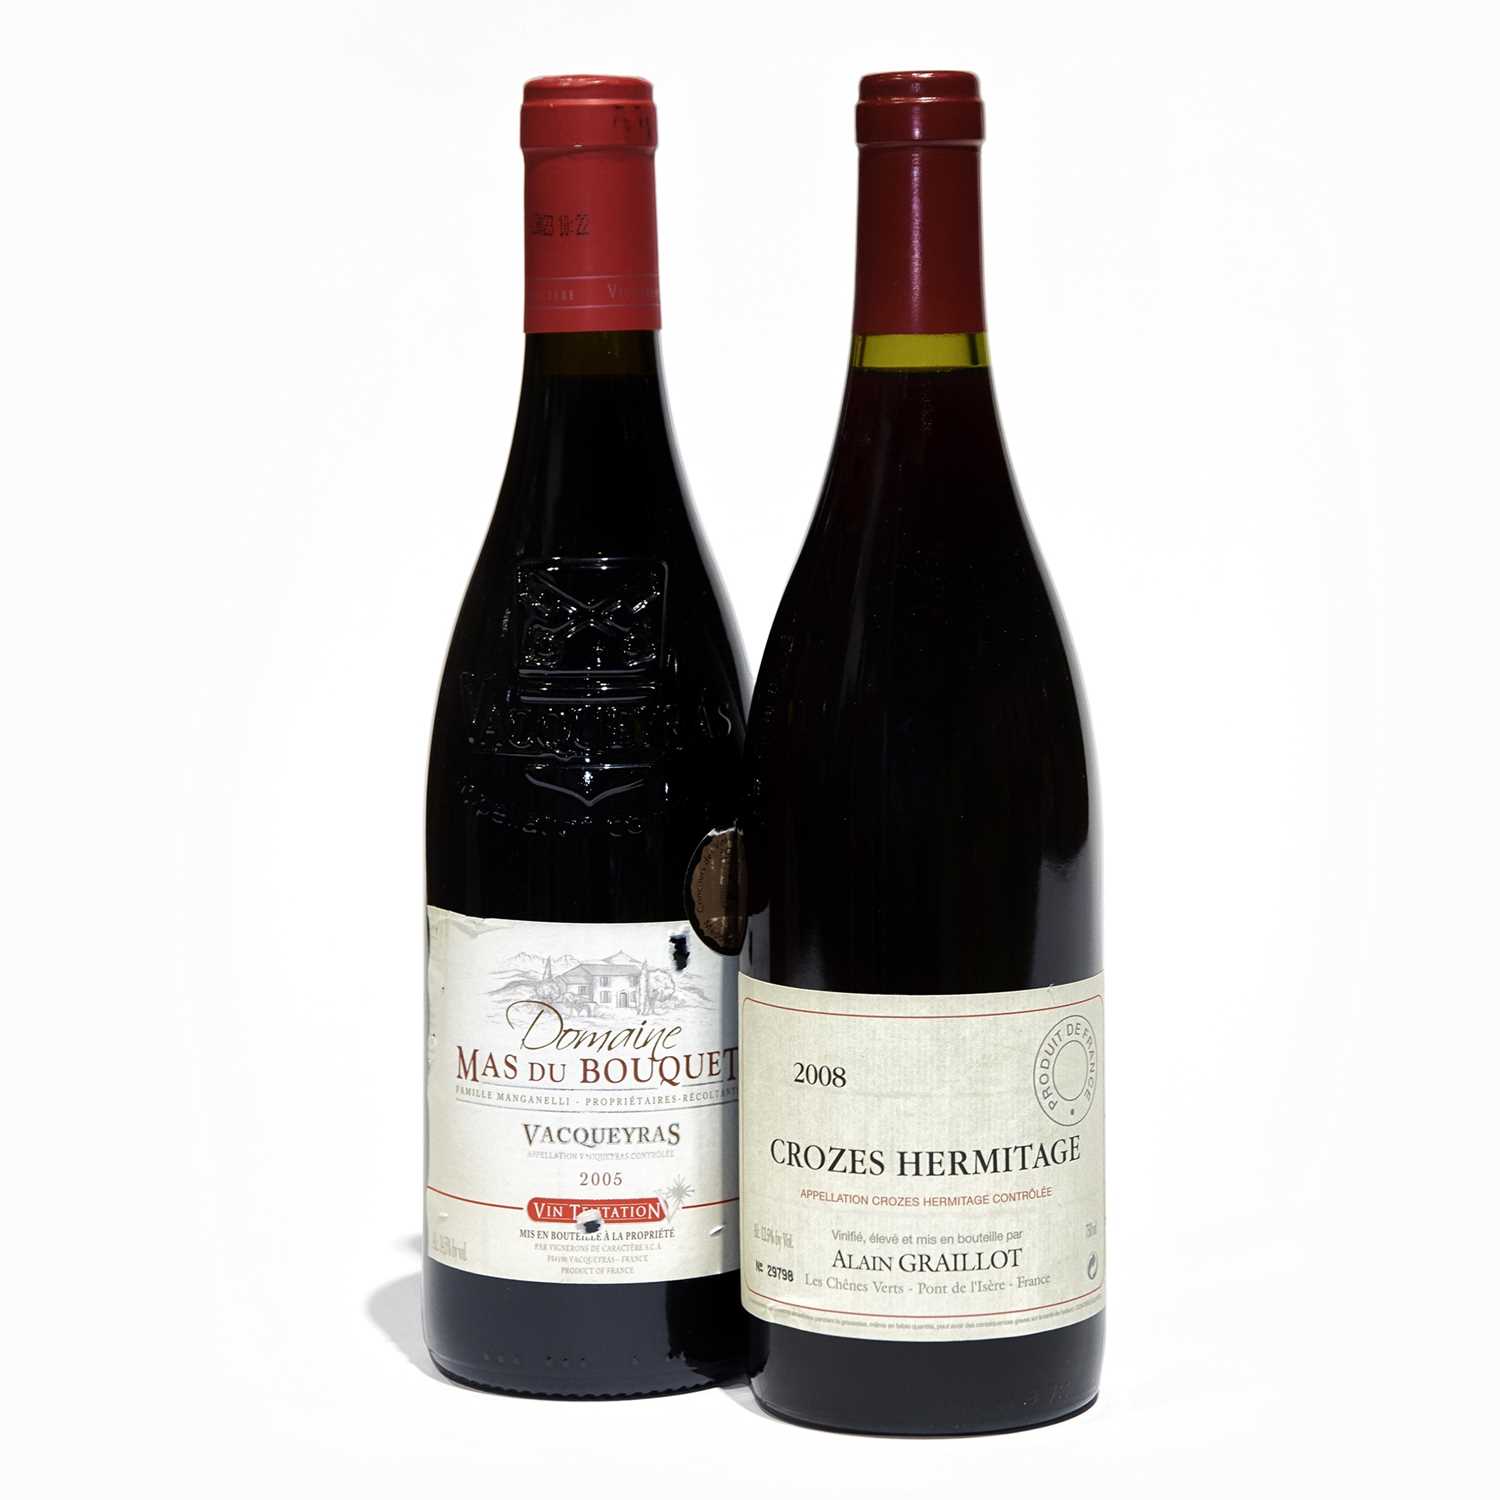 Lot 77 - 10 bottles Mixed Red Rhone